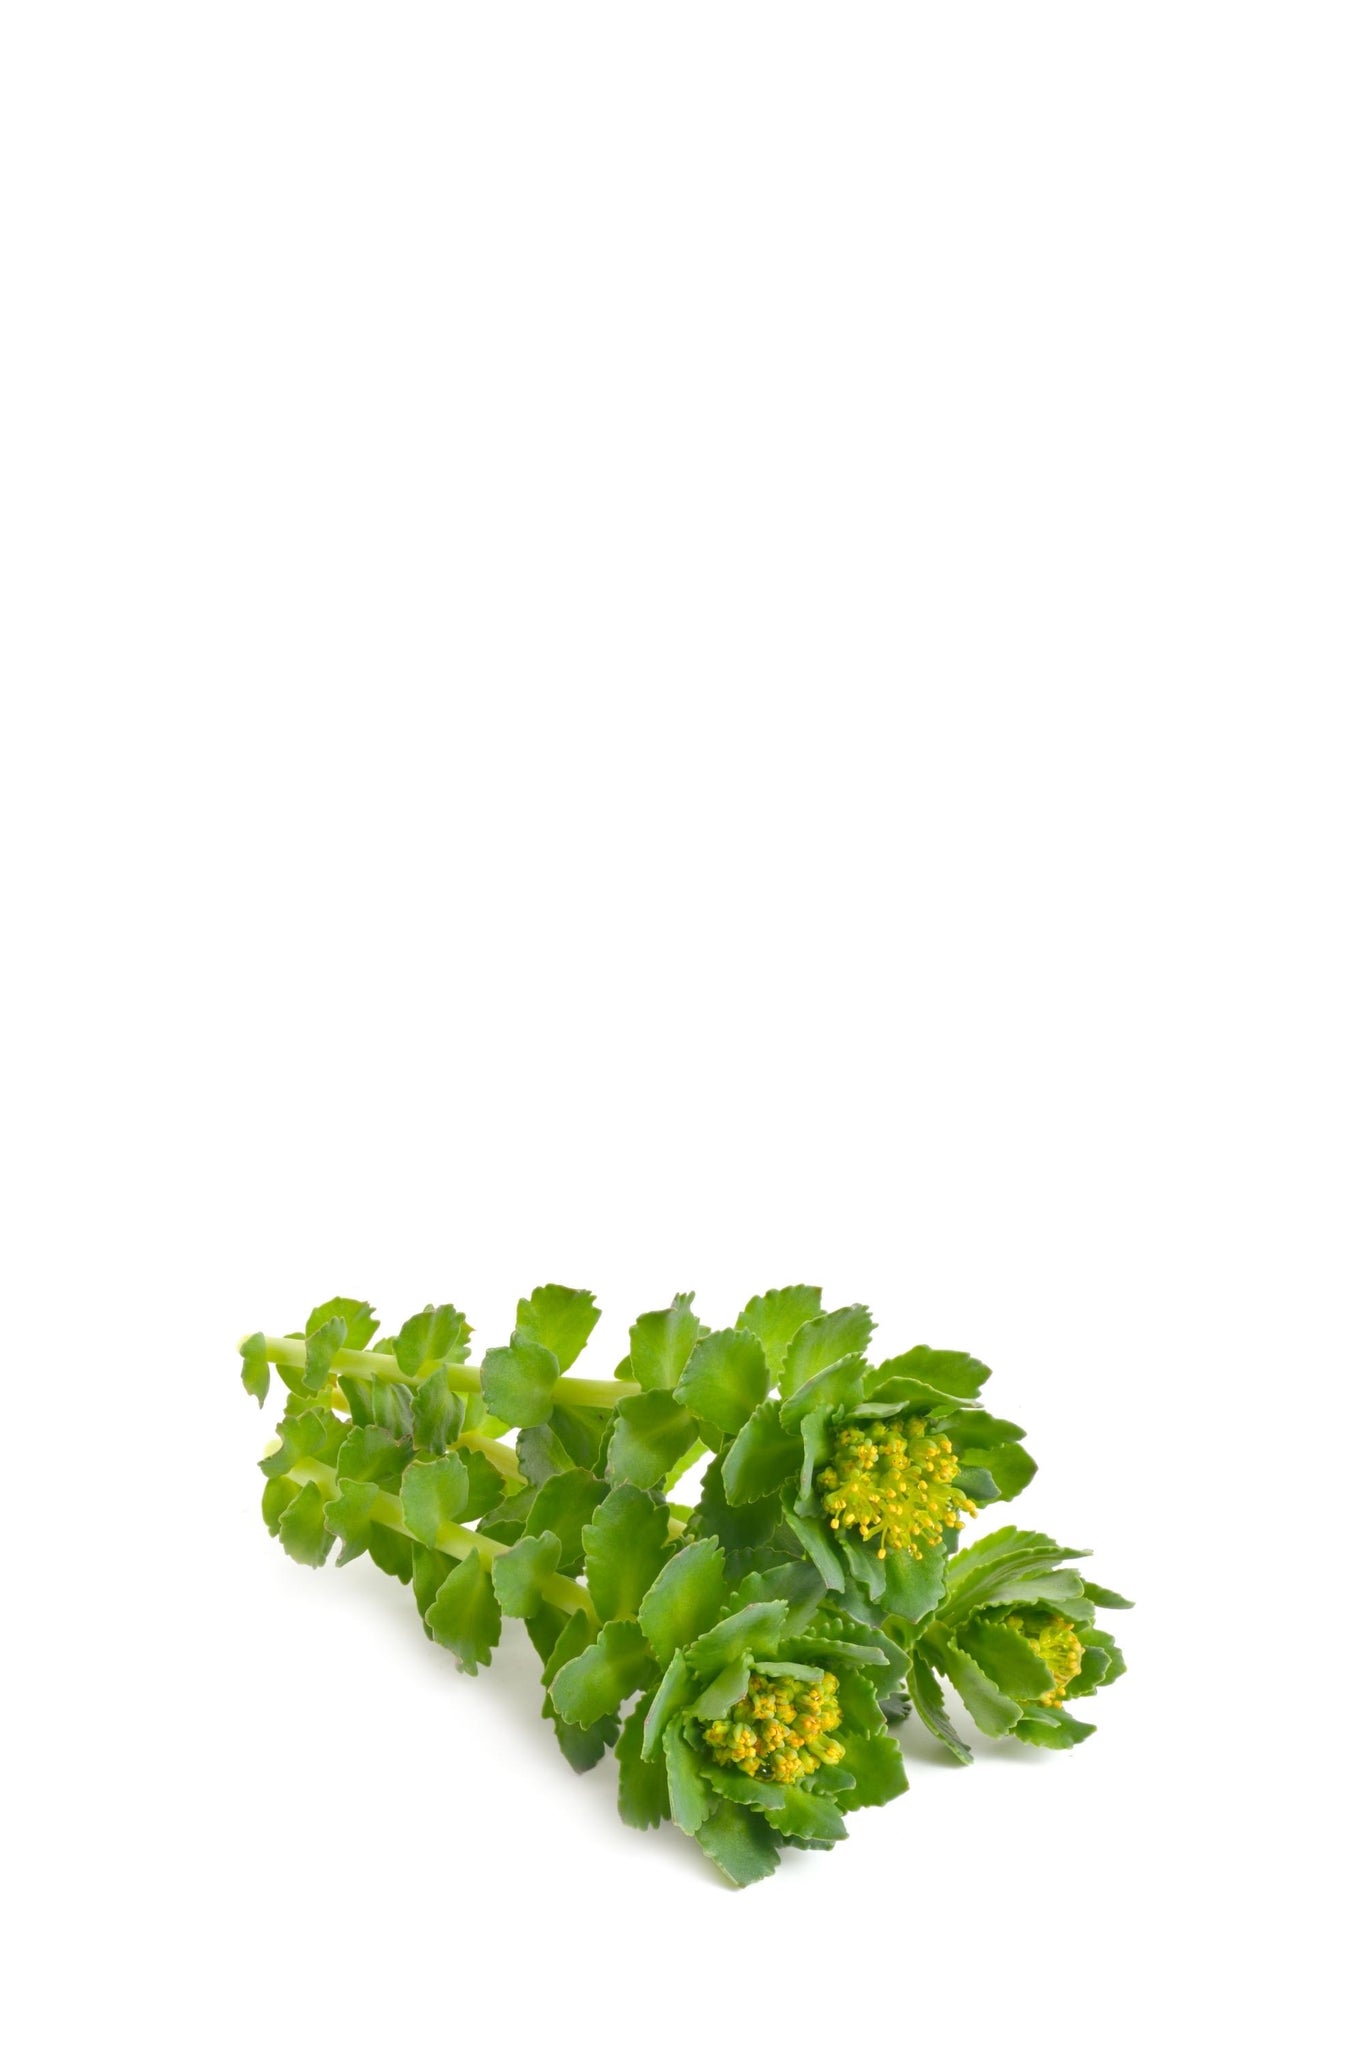 Rhodiola Rosea is an adaptogenic and anti-fatigue herb traditionally used for centuries to modulate the body's resistance to physical, environmental, and emotional stressors.